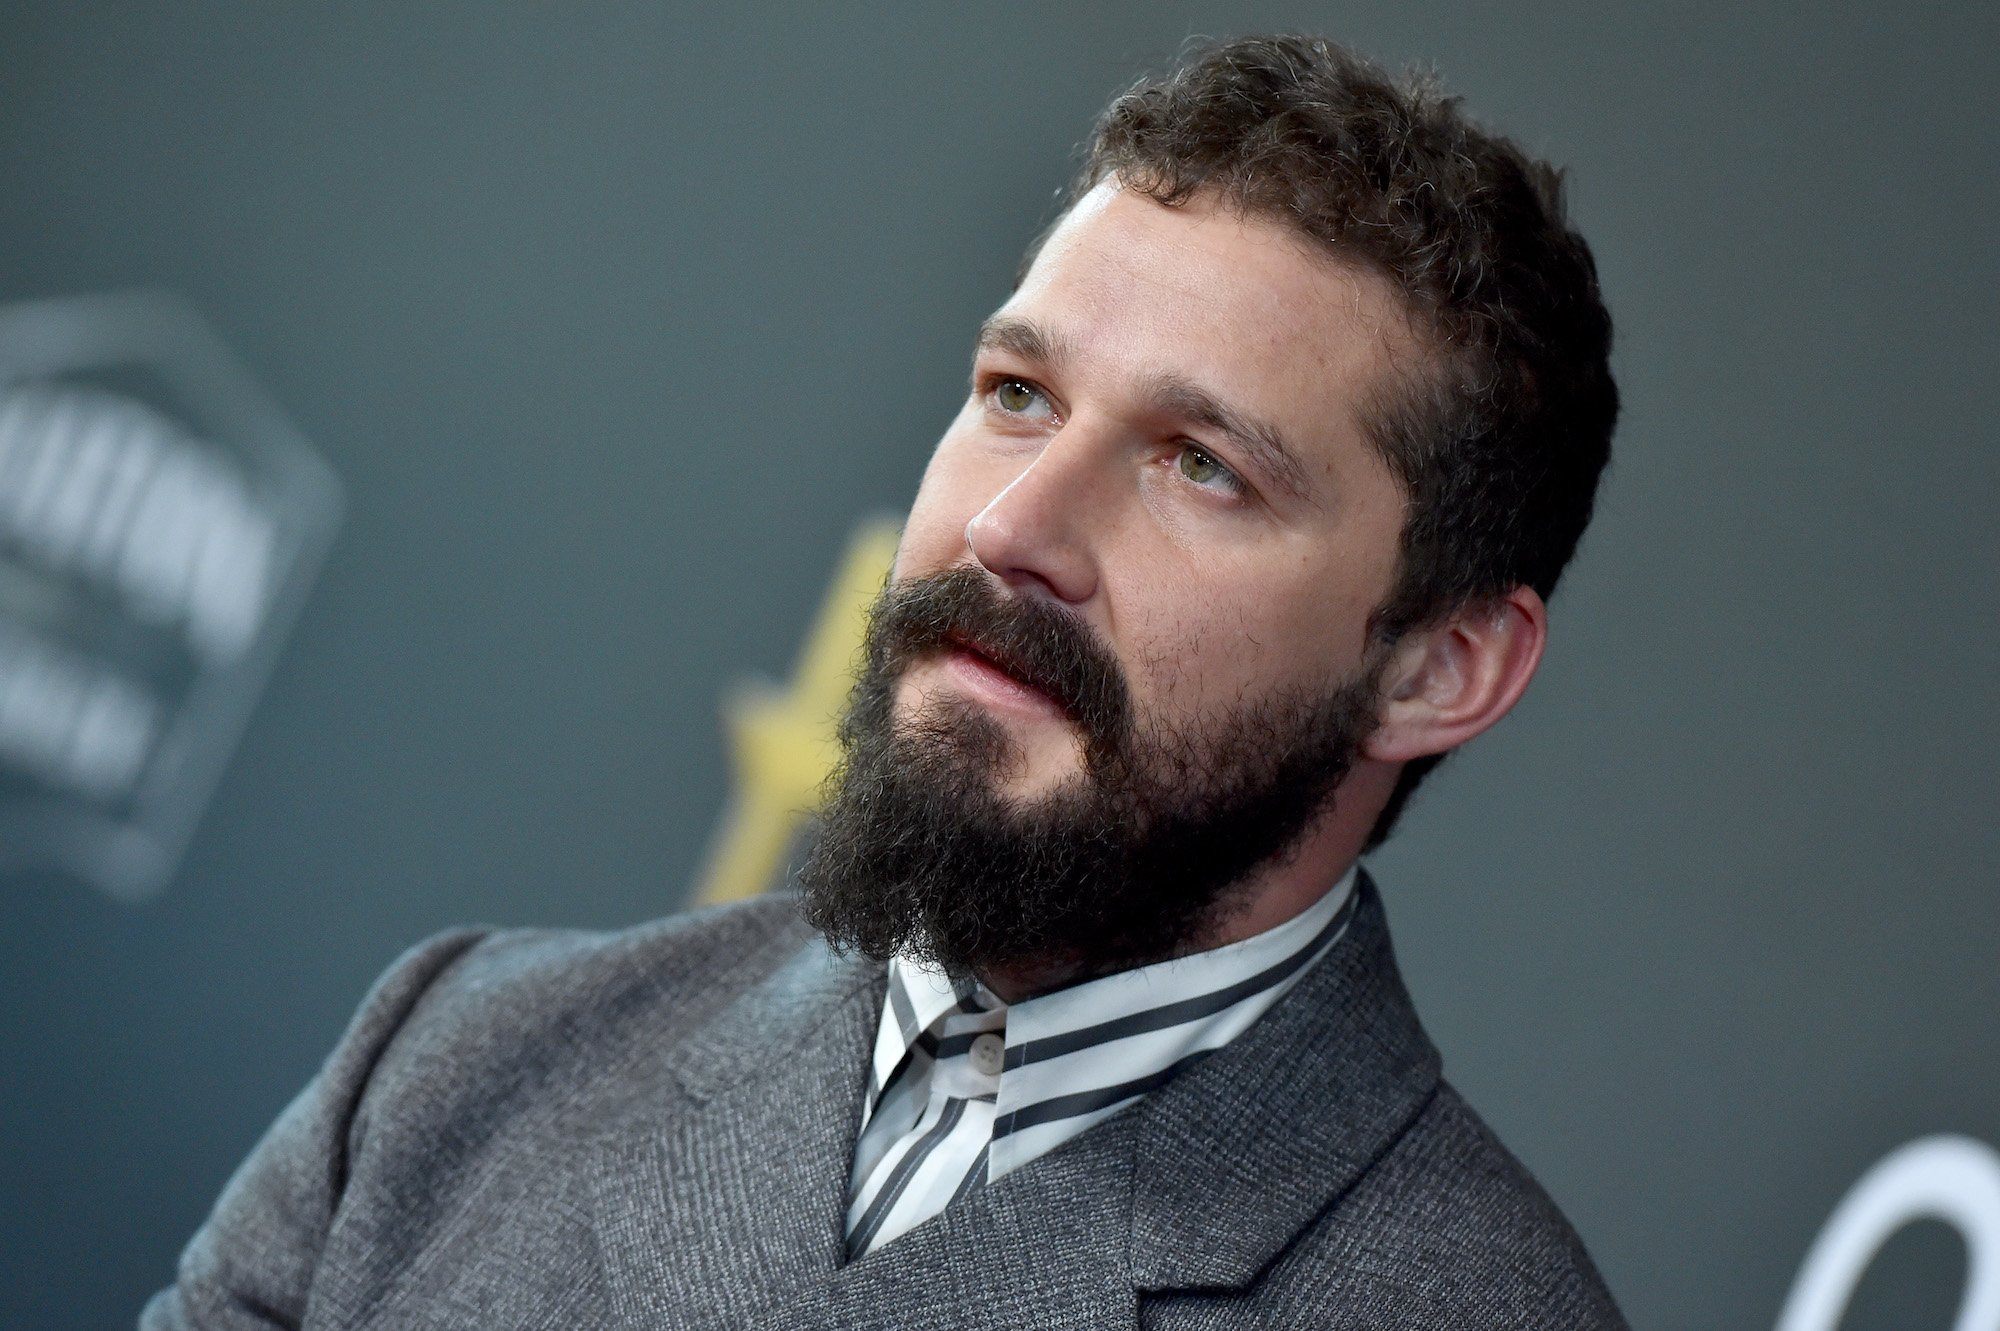 Shia LaBeouf Landed His Role in ‘Nymphomaniac’ by Sending the Director His Sex Tape With Then-Girlfriend